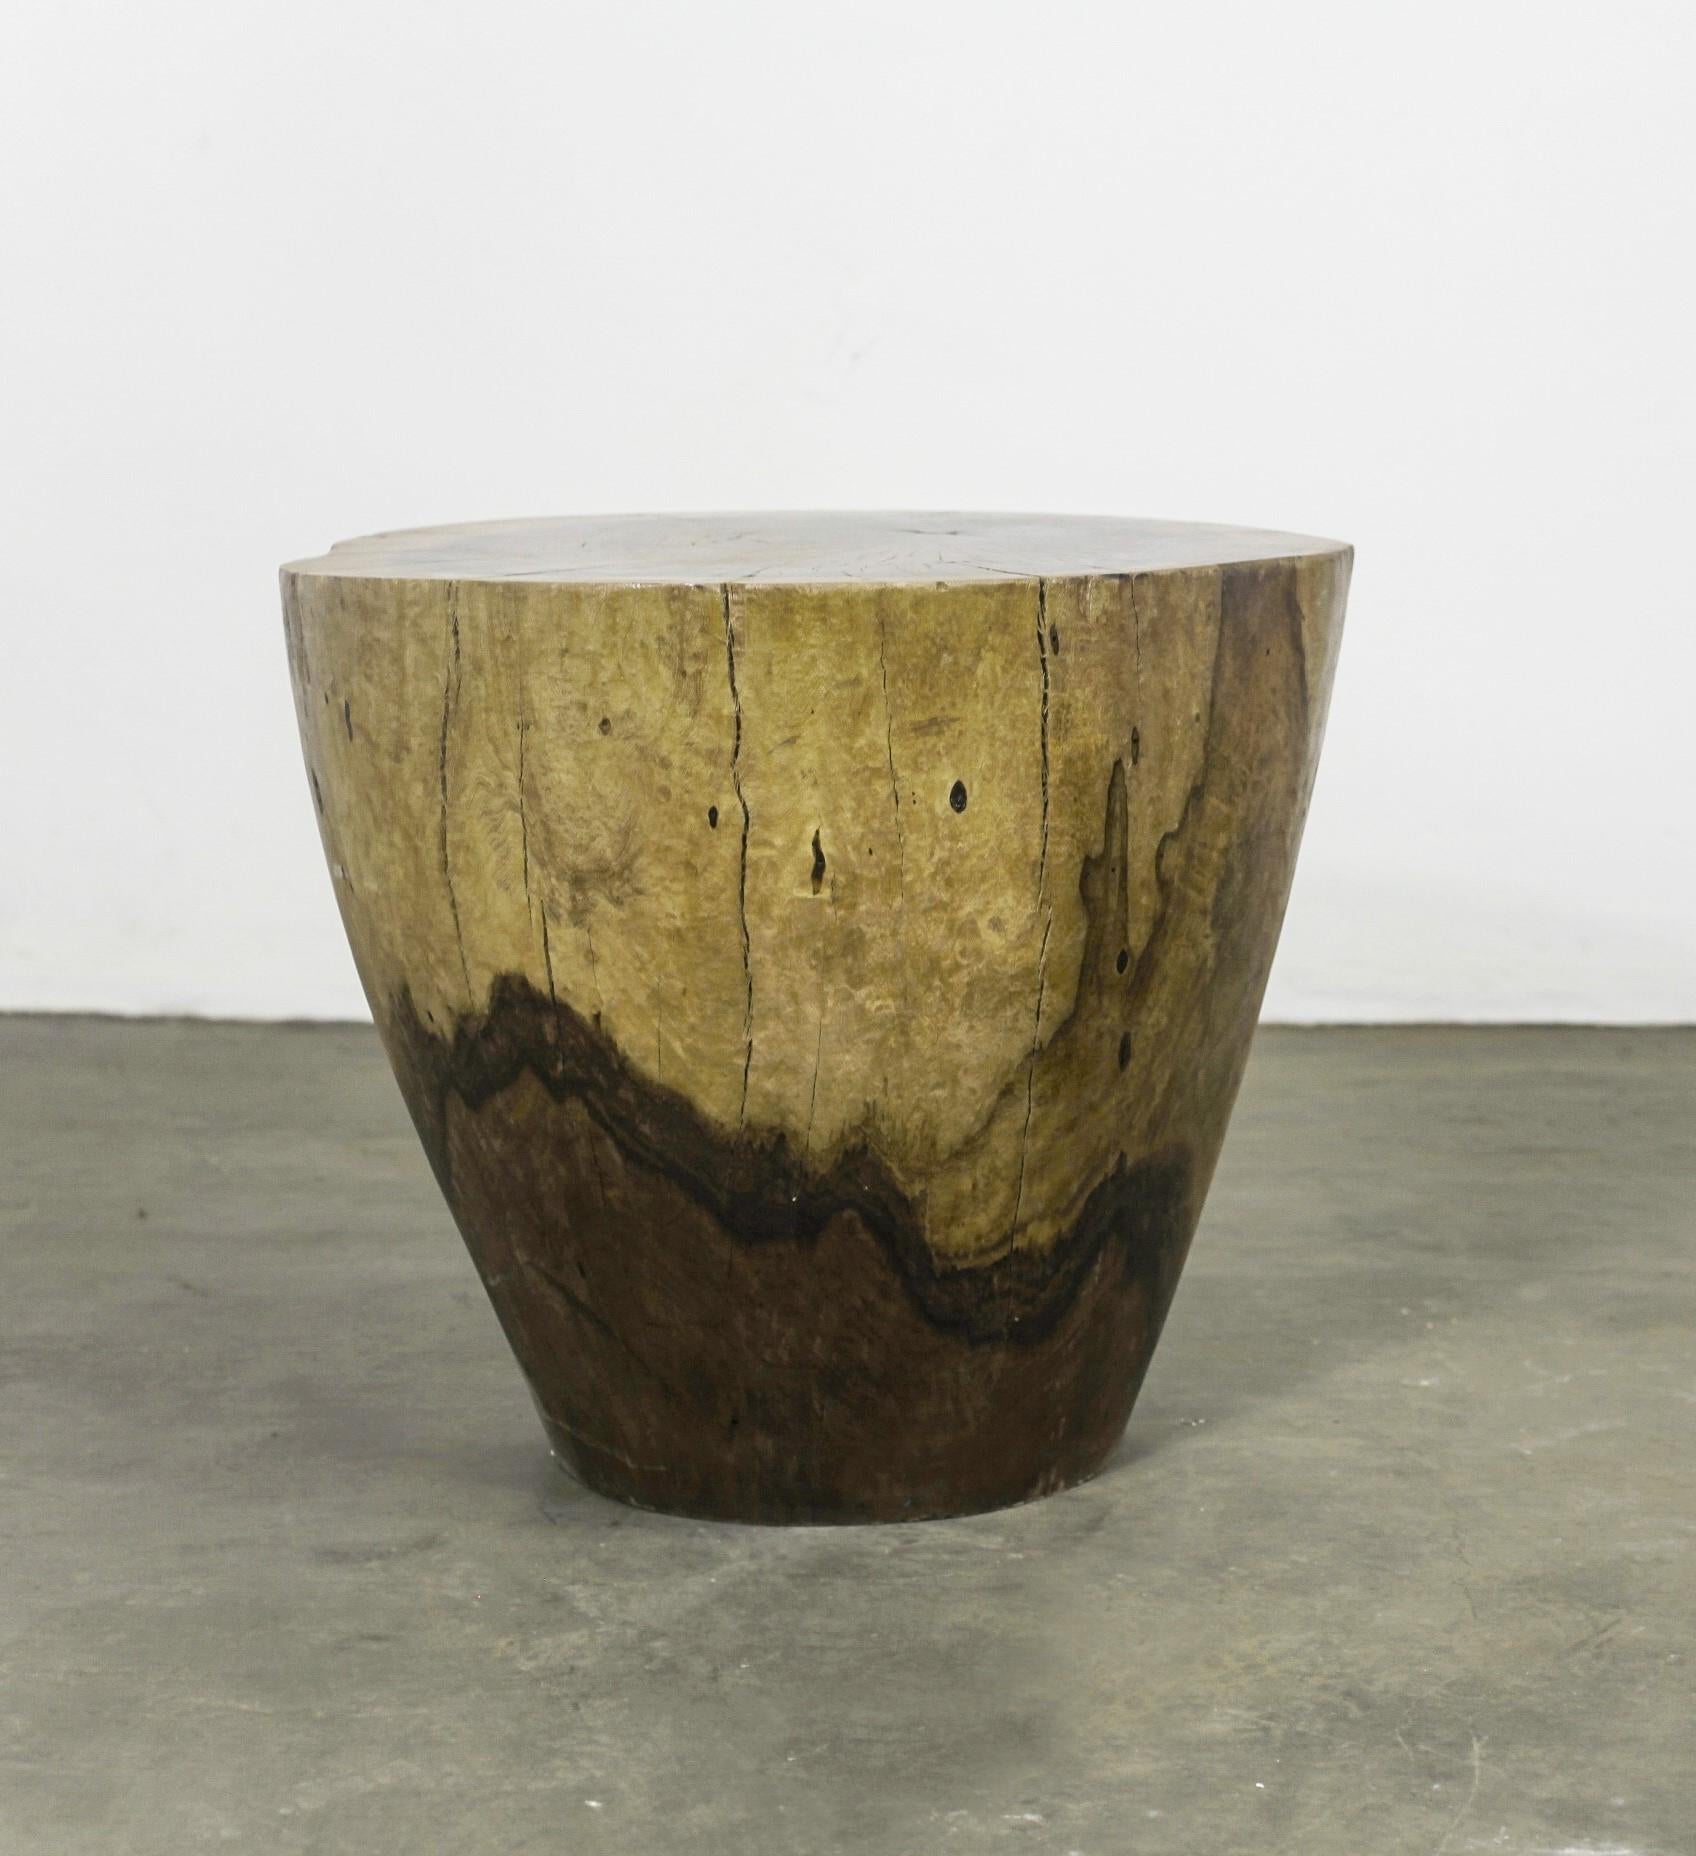 Francisco hand carved live edge solid wood trunk table ƒ20 by Costantini, in Stock

Measurements are 23.6